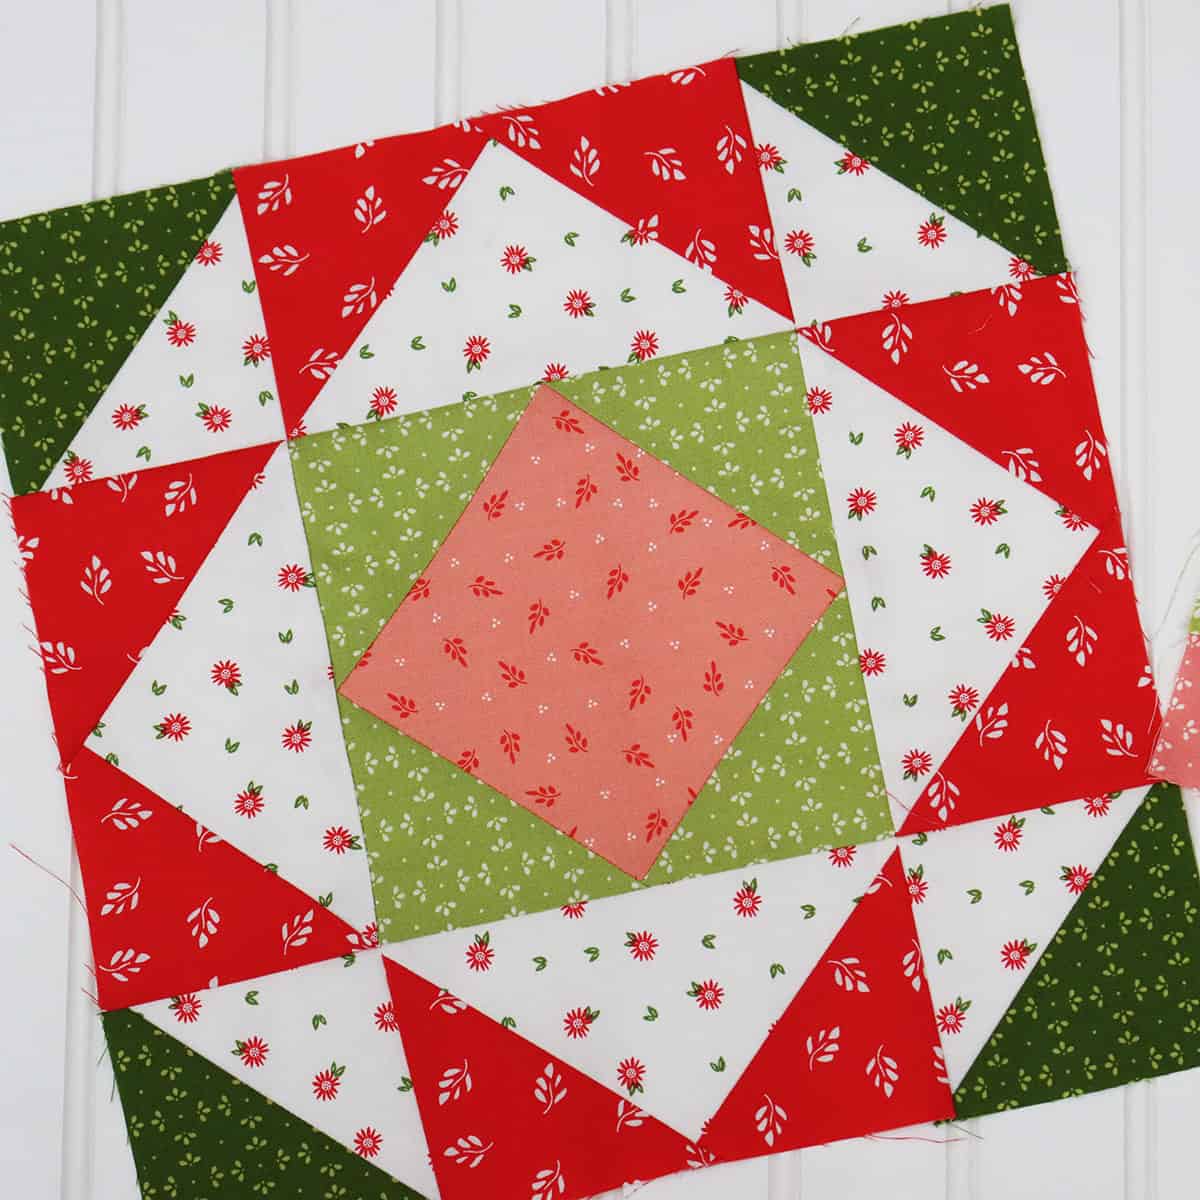 Quilt Block of the Month November 2023 - A Quilting Life